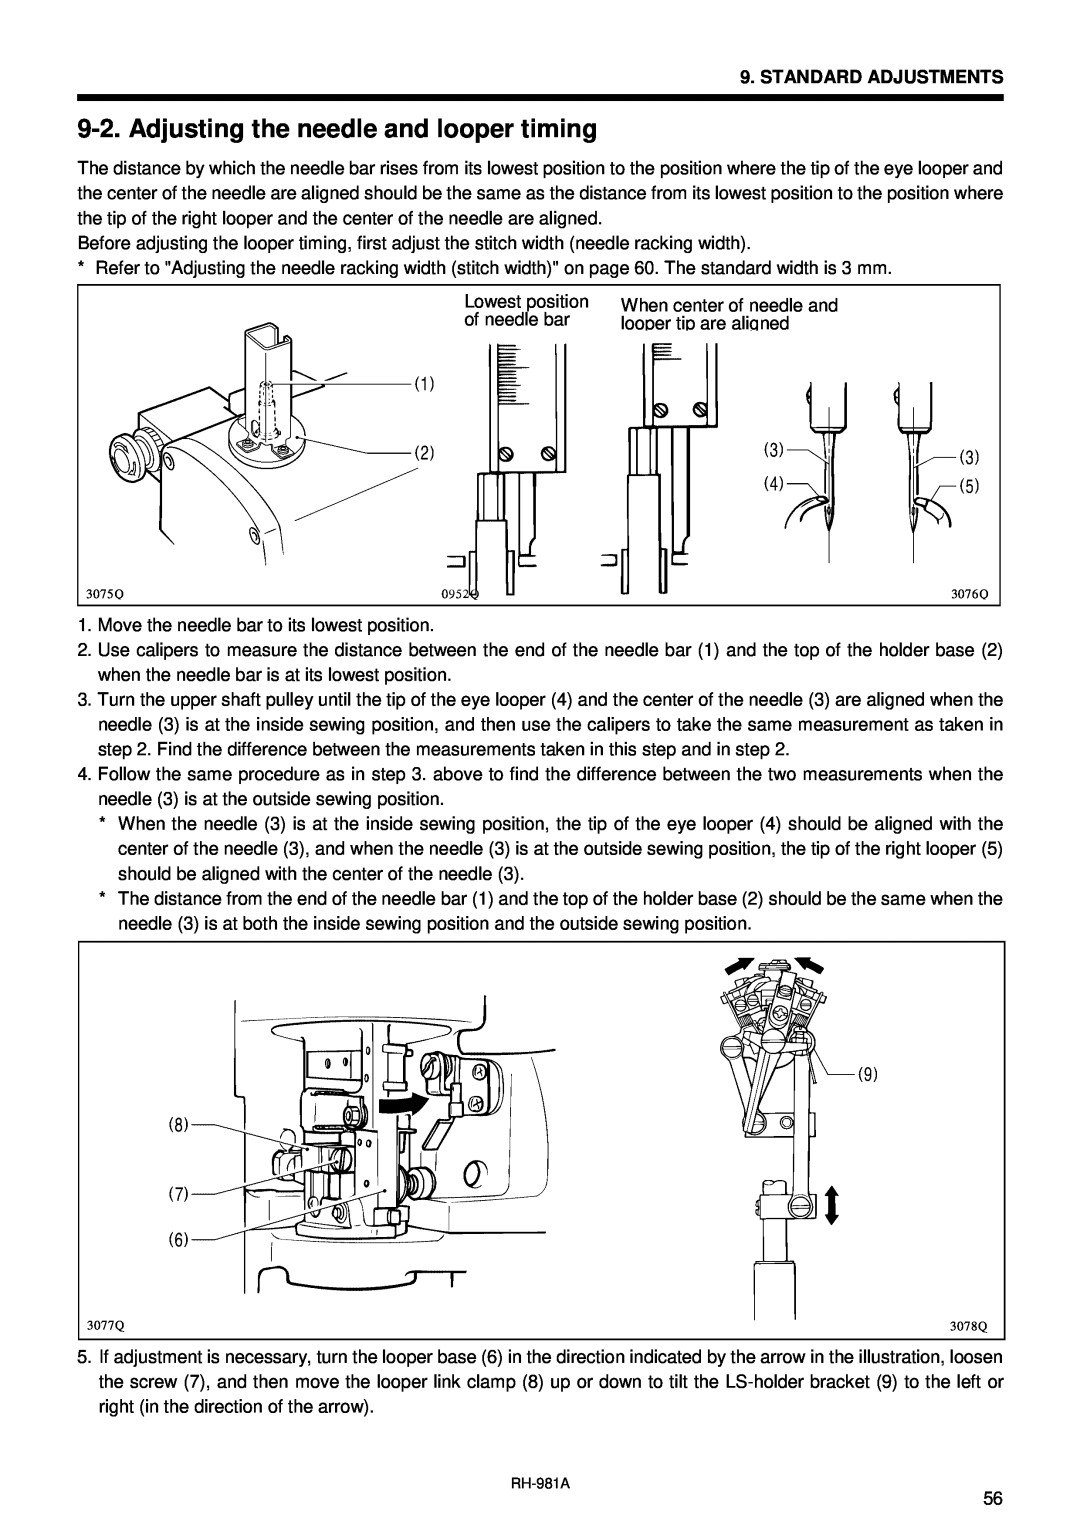 Brother rh-918a manual Adjusting the needle and looper timing 